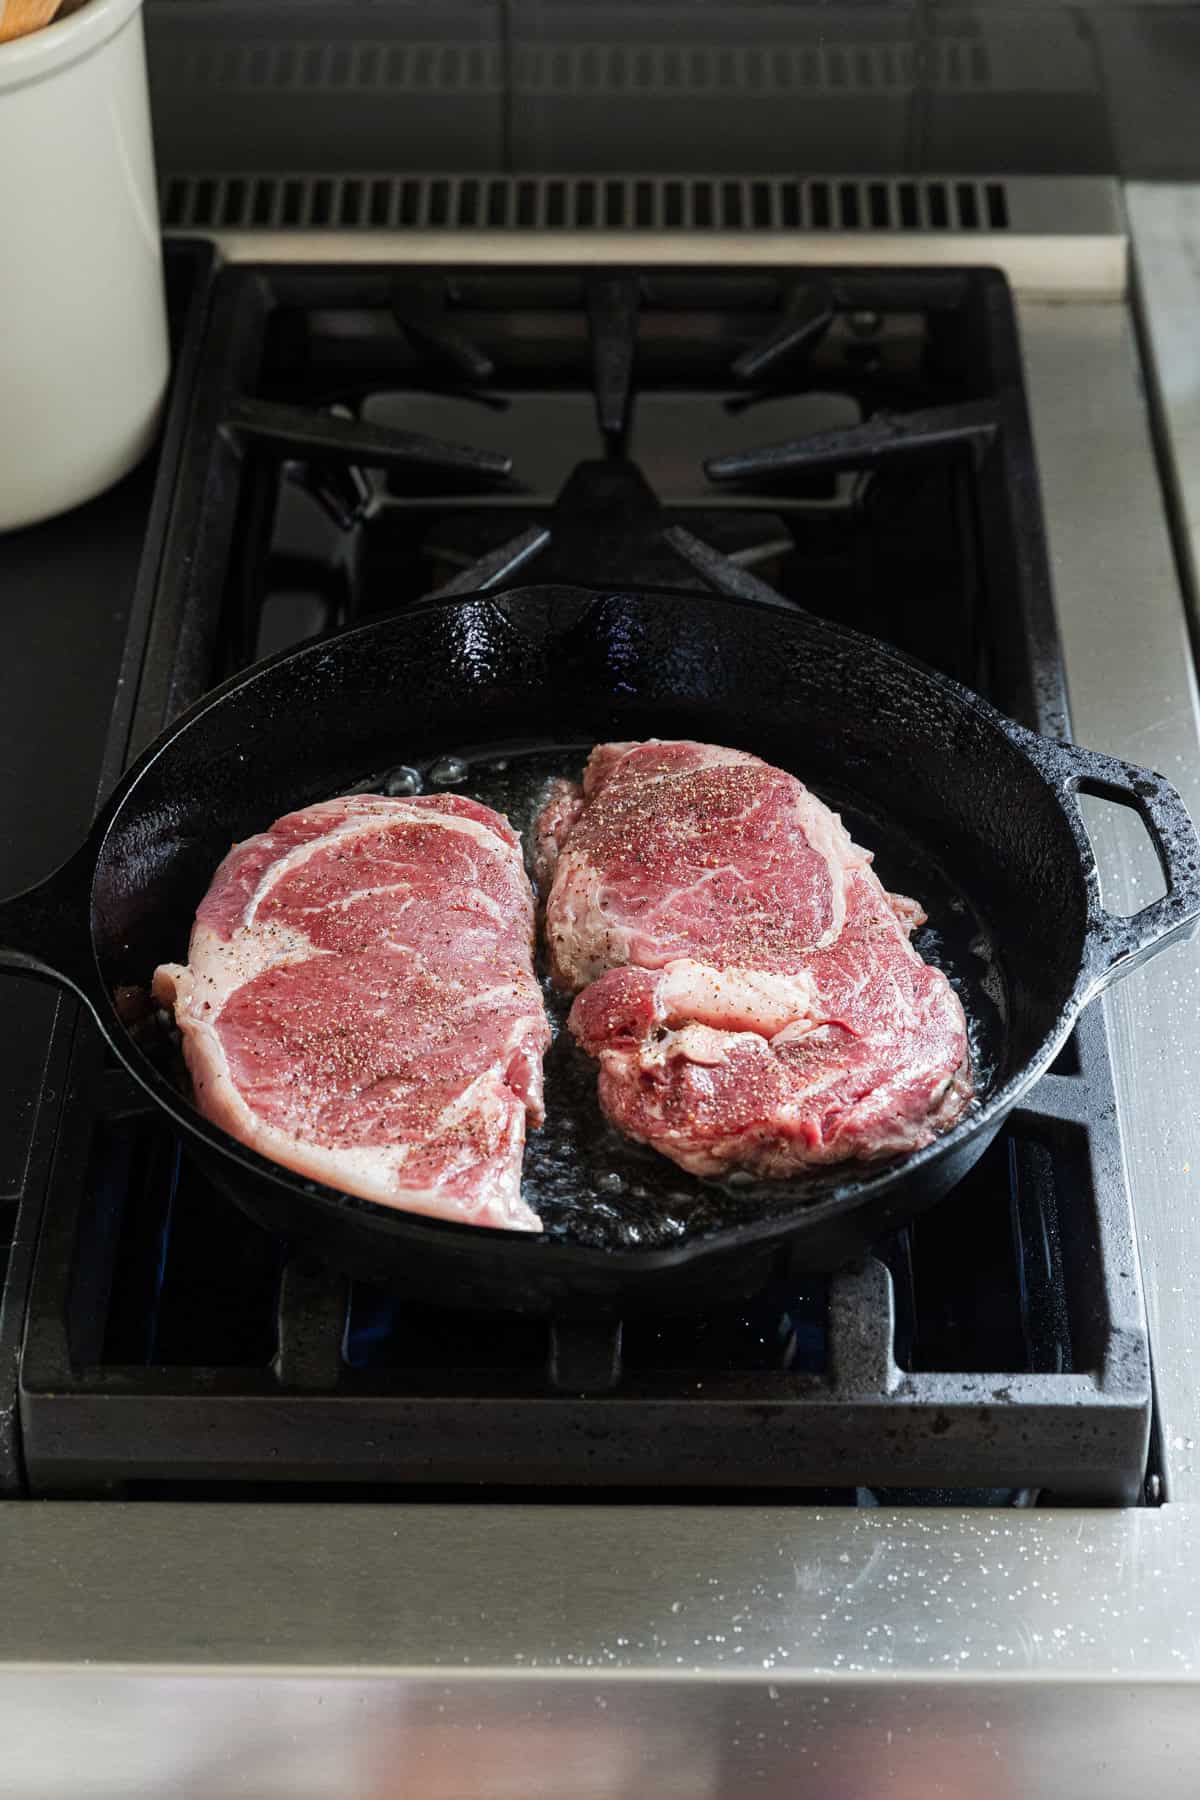 Cooking ribeyes in a cast iron skillet.